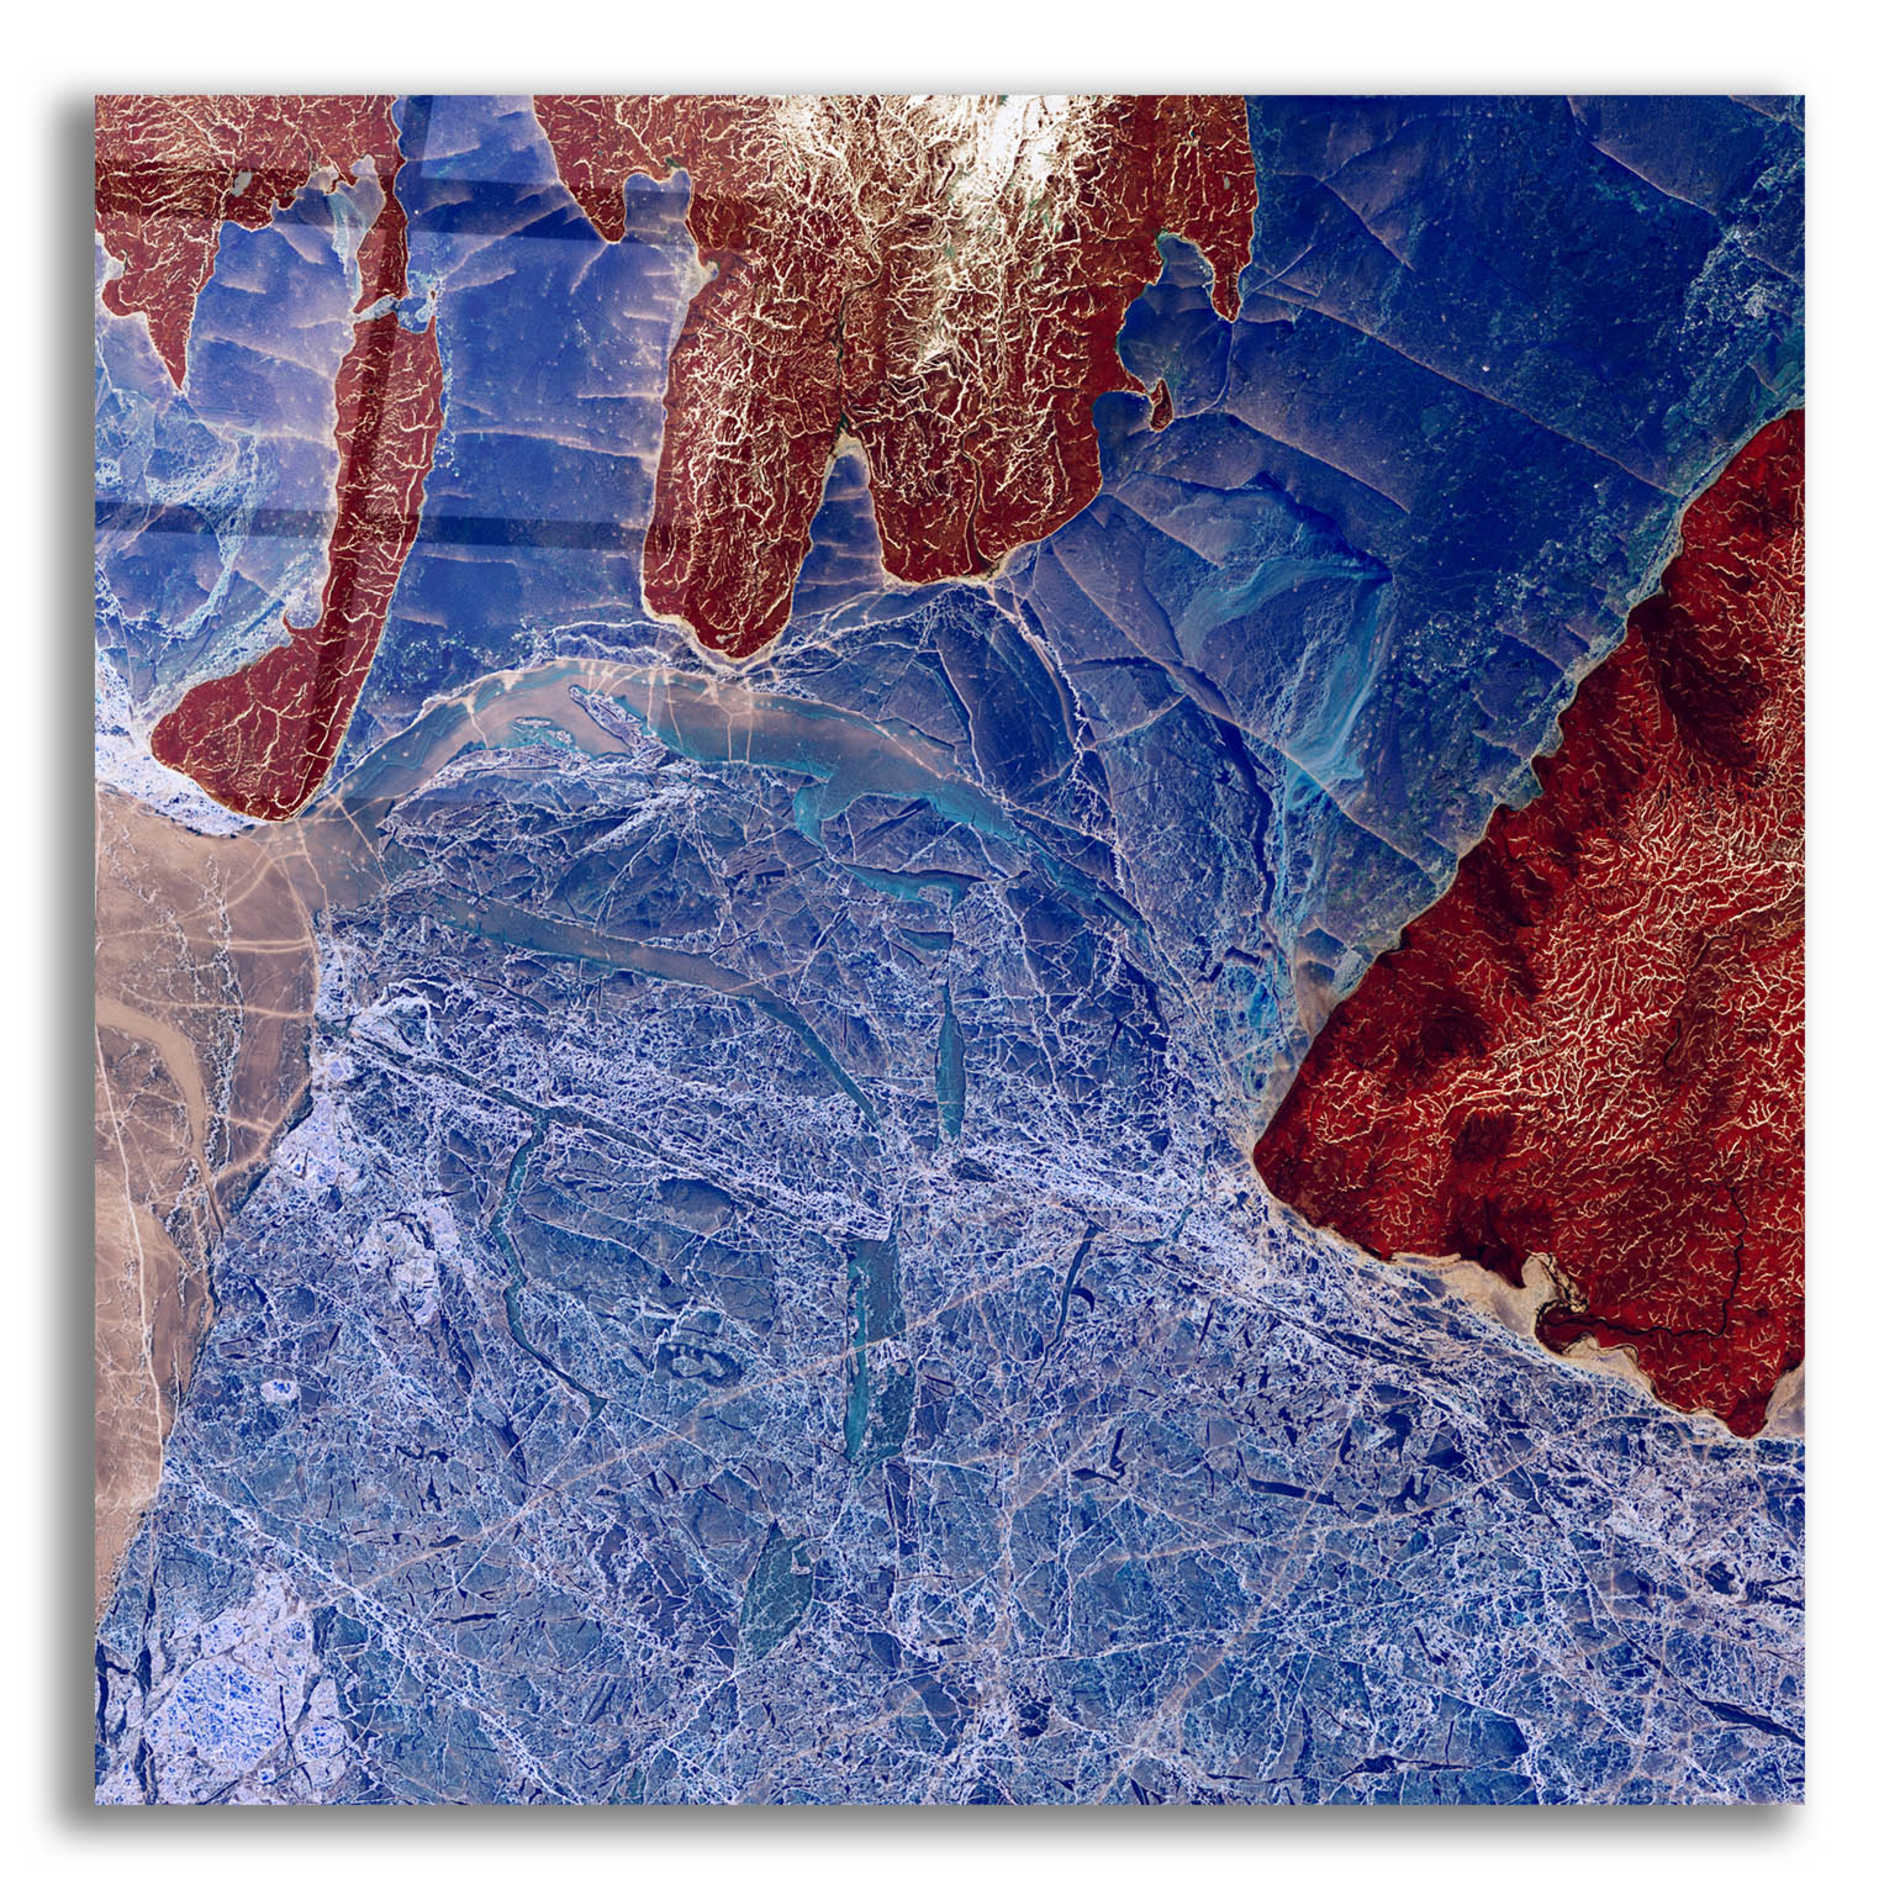 Epic Art 'Earth as Art: Fractured,' Acrylic Glass Wall Art,12x12x1.1x0,18x18x1.1x0,26x26x1.74x0,37x37x1.74x0